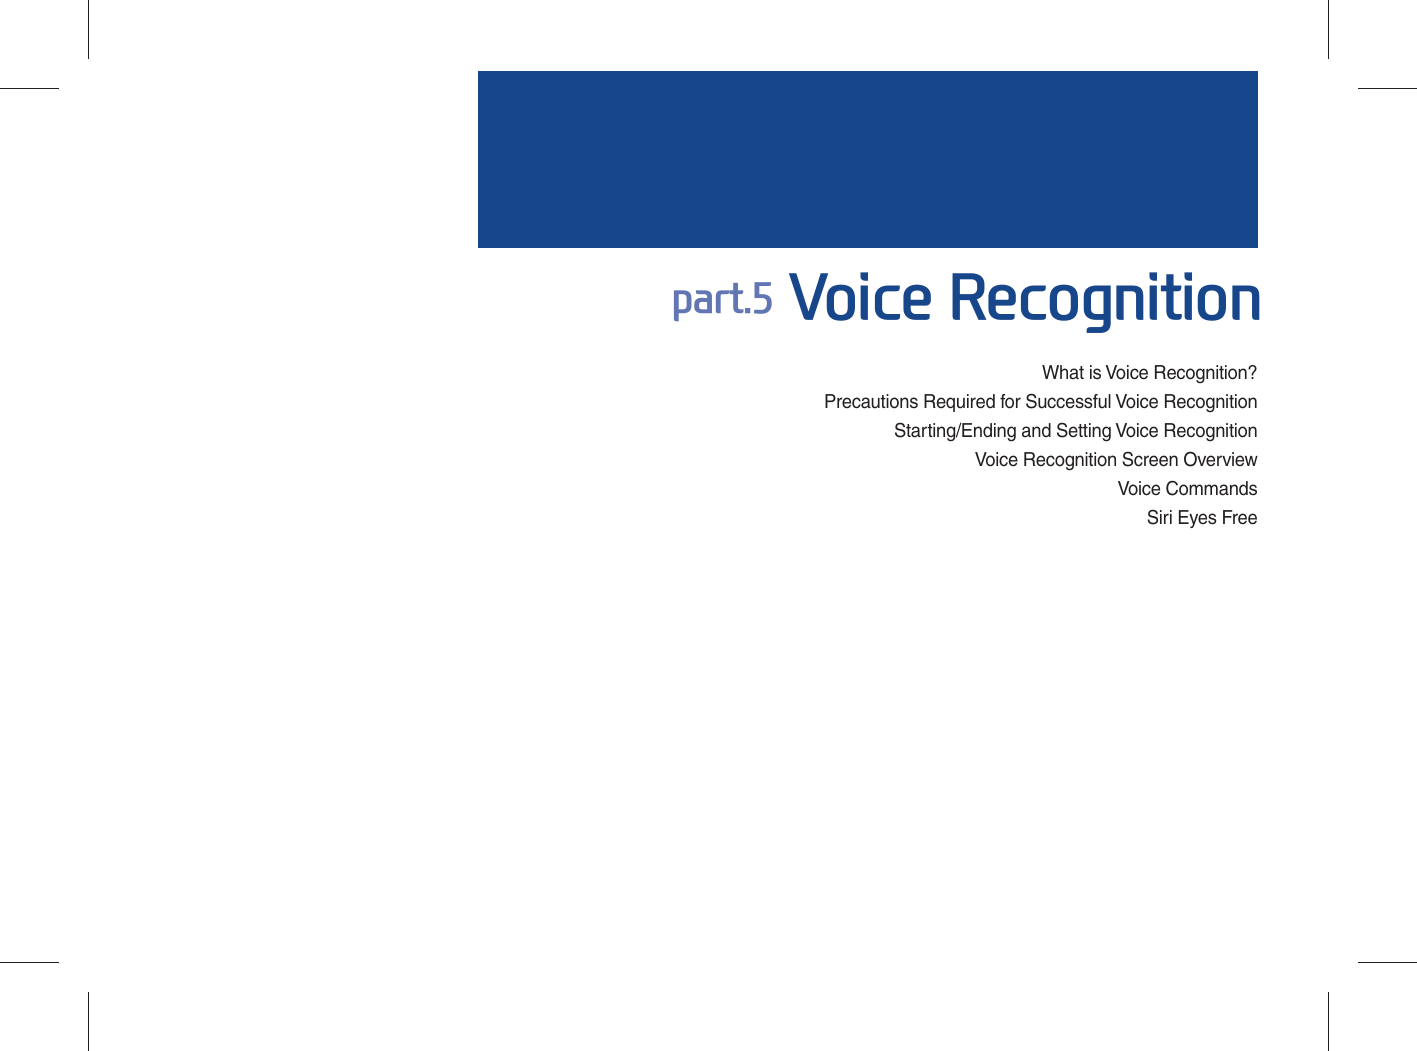 What is Voice Recognition?Precautions Required for Successful Voice RecognitionStarting/Ending and Setting Voice RecognitionVoice Recognition Screen OverviewVoice CommandsSiri Eyes Free part.5 Voice Recognition